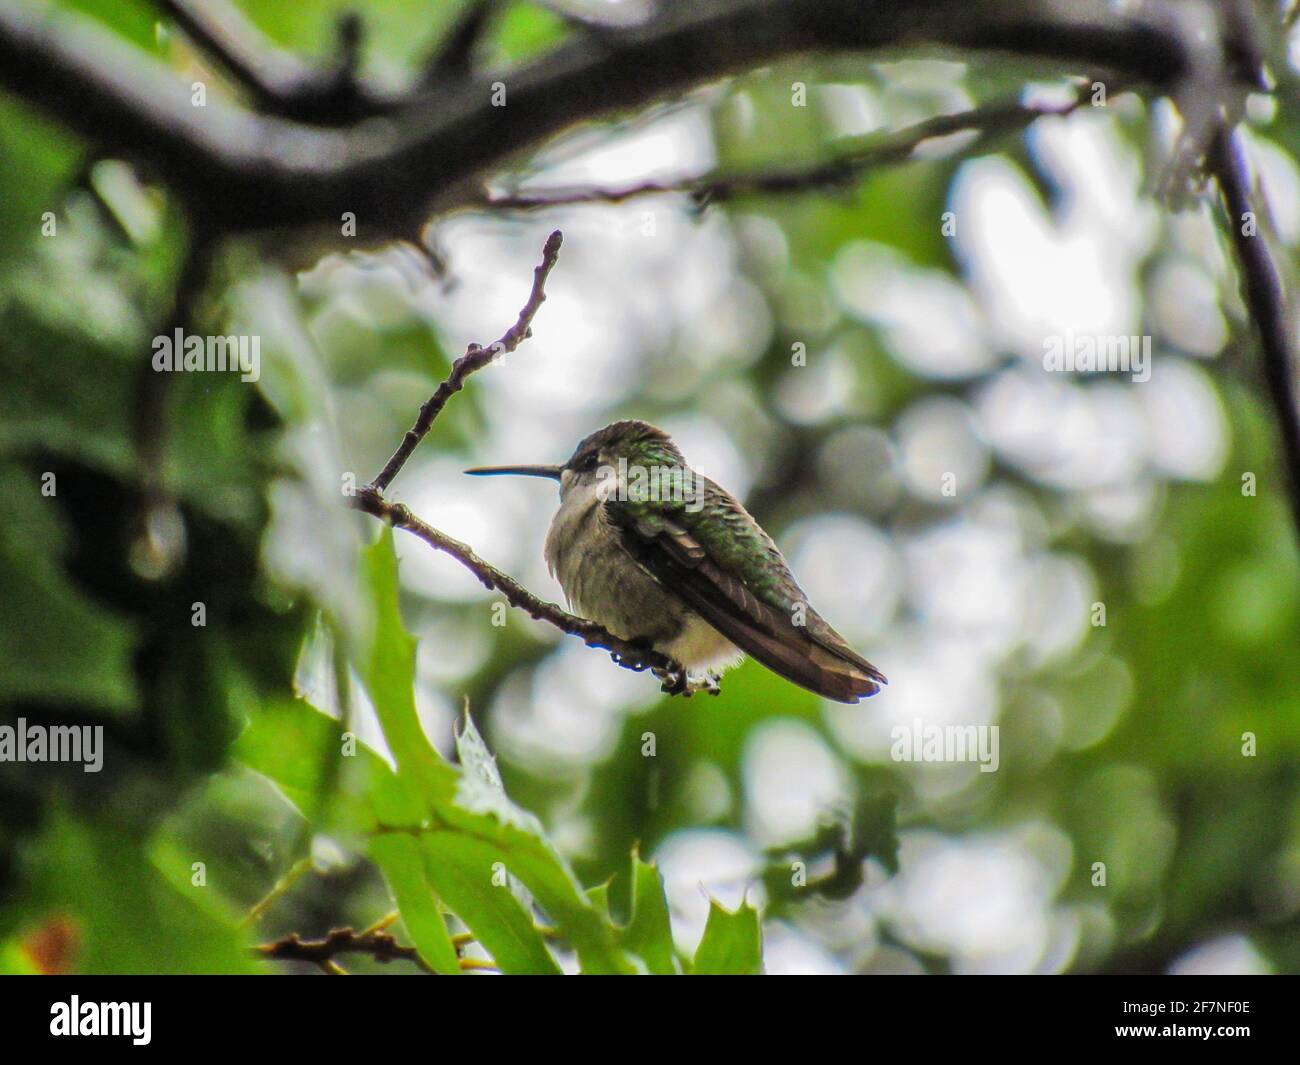 Female Ruby-throated Hummingbird sitting on a branch during a rain storm. Stock Photo